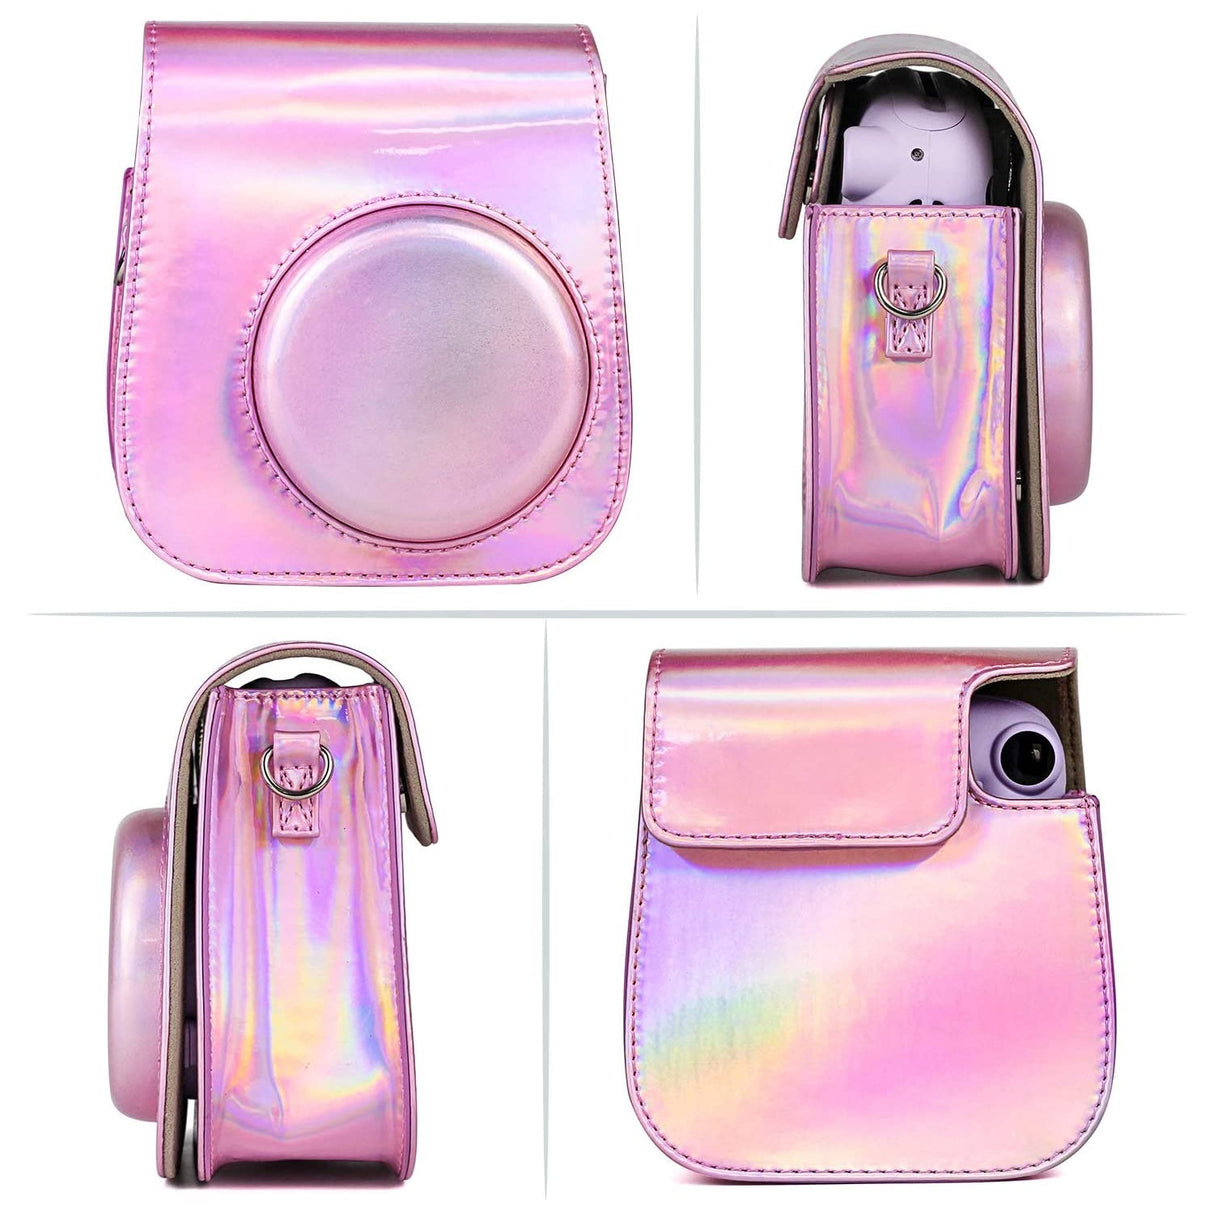 ZENKO MINI 11 8 8+ 9 INSTAX CAMERA POUCH BAG Holographic Pink